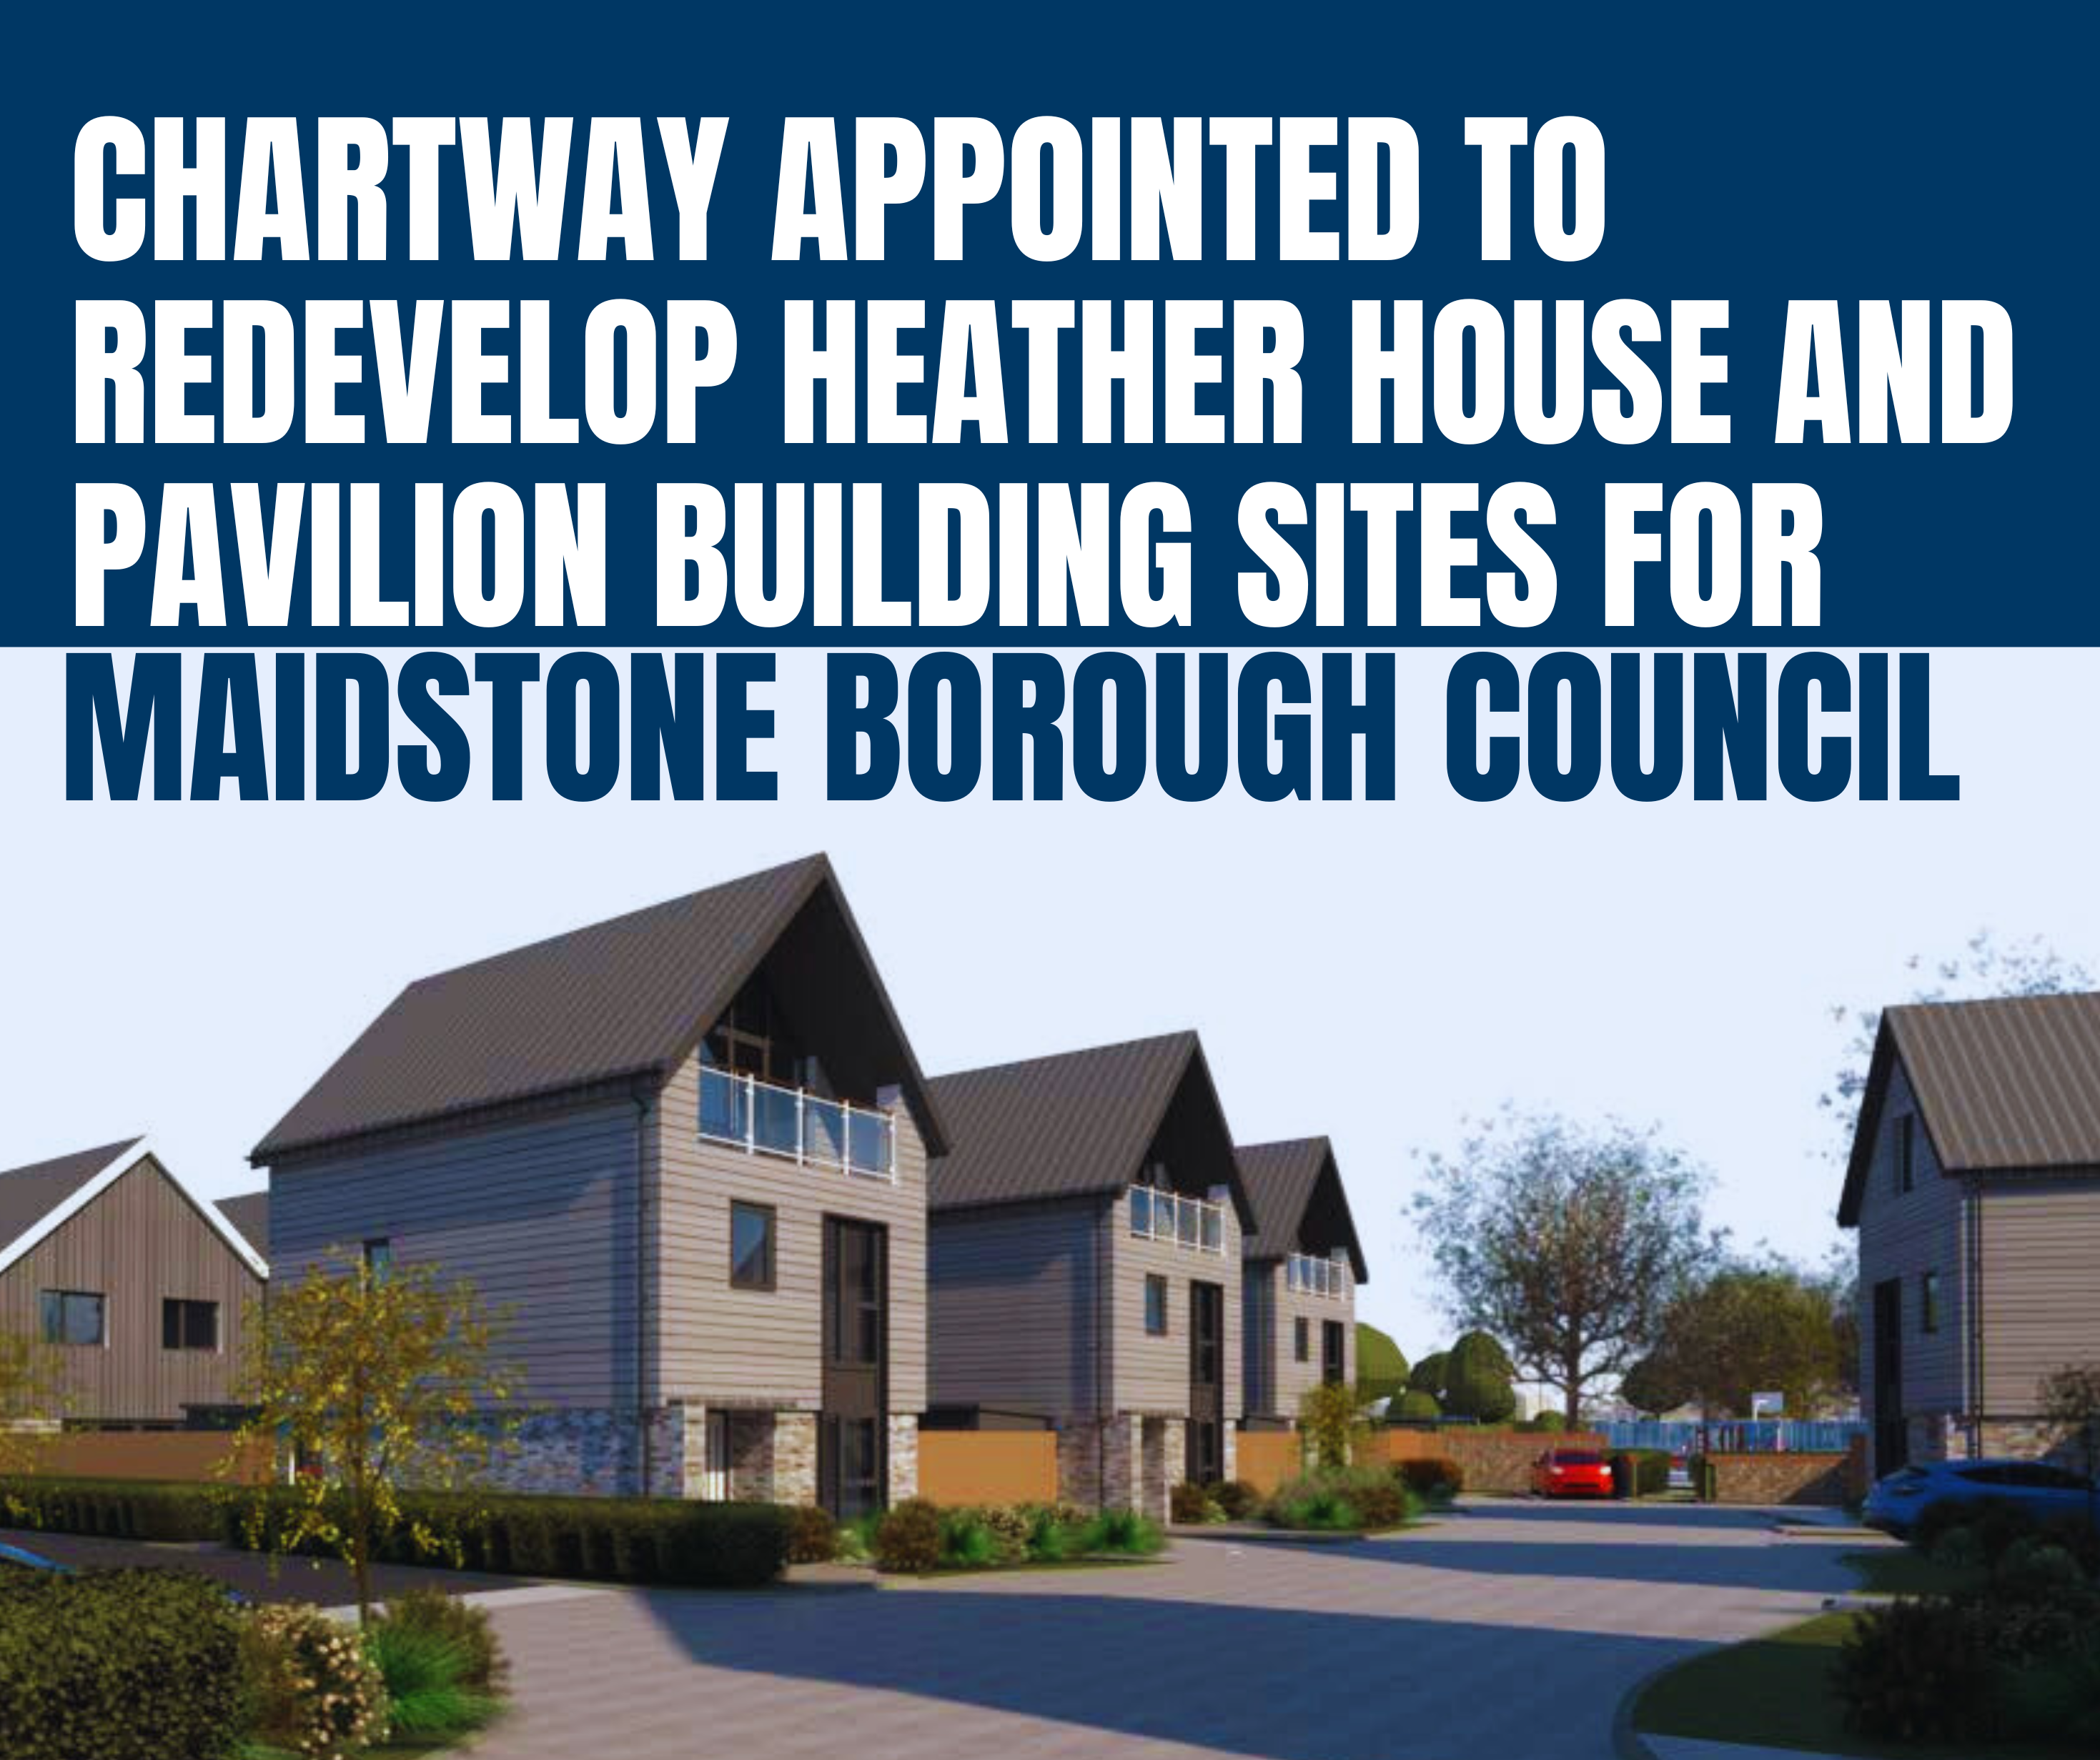 Chartway Construction appointed by Maidstone Borough Council